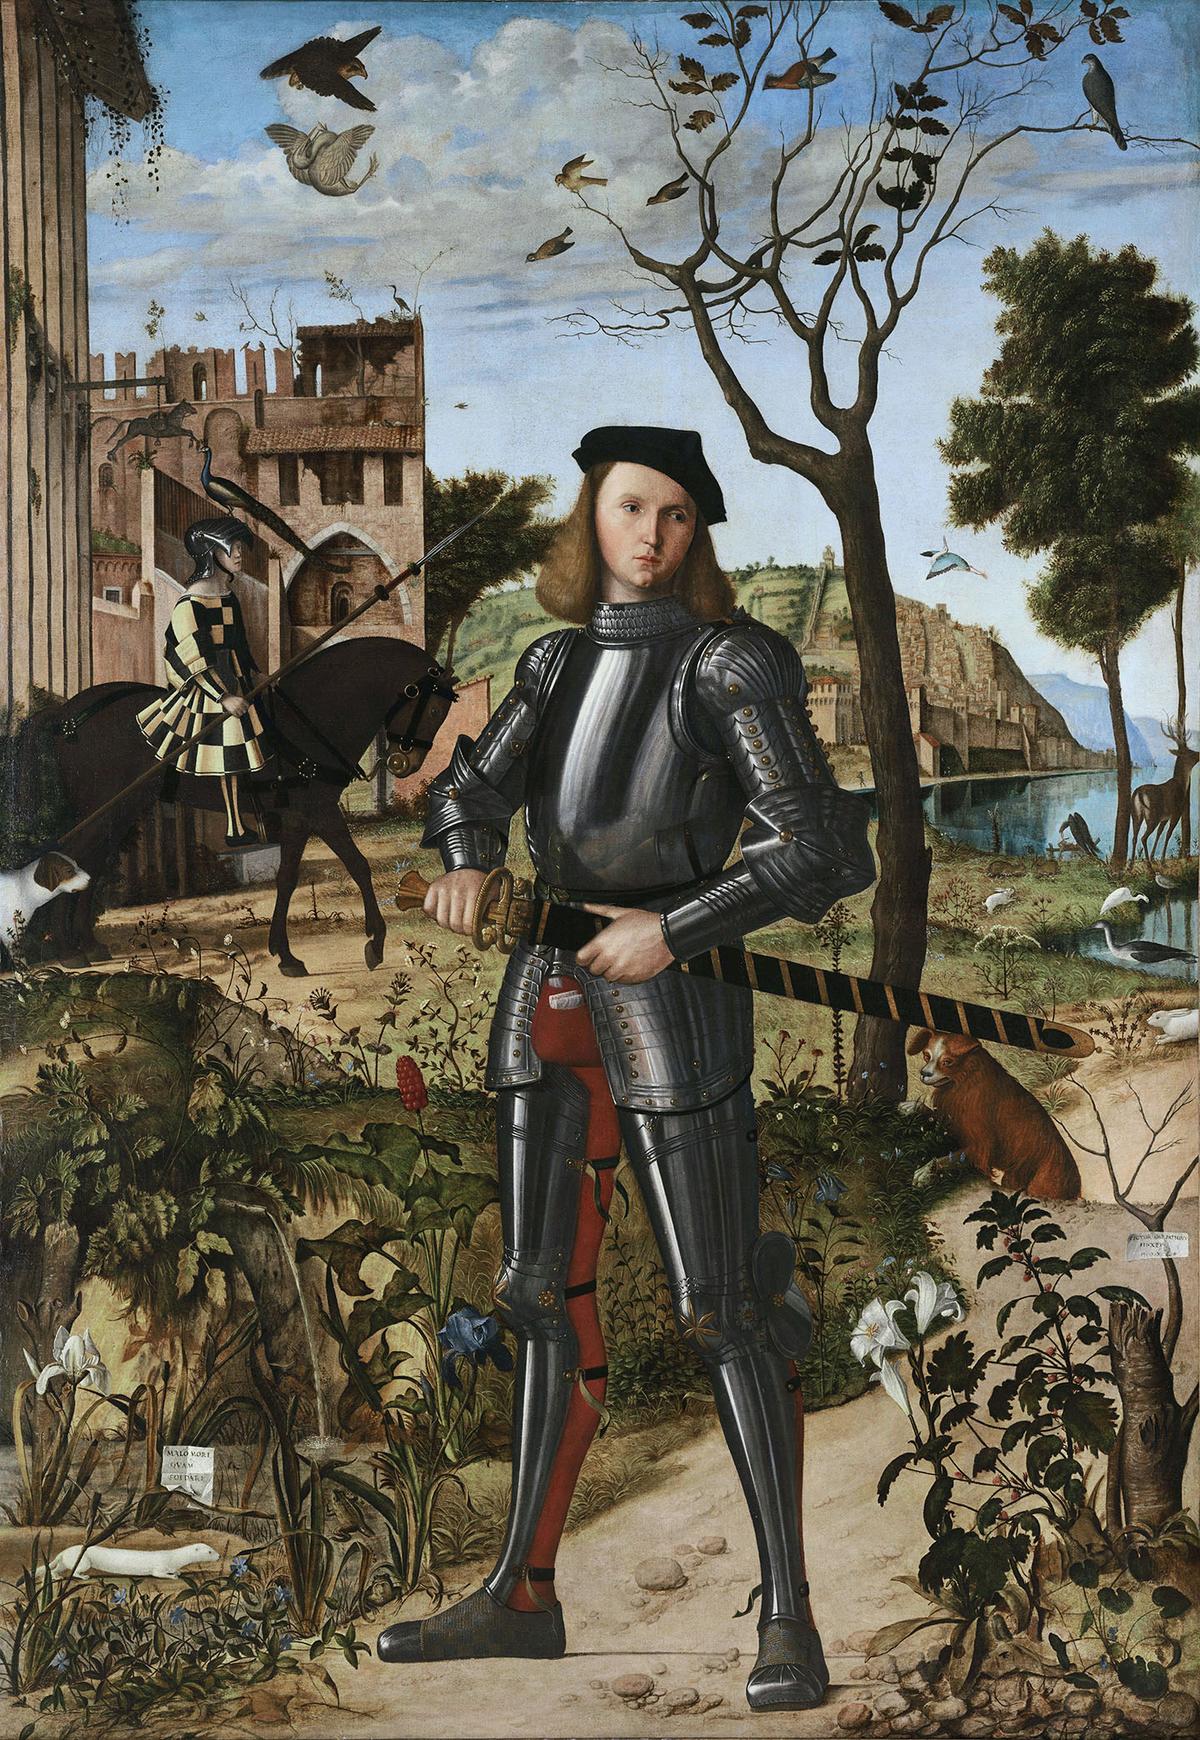 "Young Knight in a Landscape," circa 1505, by Vittore Carpaccio. Oil on canvas; 59 3/5 inches by 86 inches. Thyssen-Bornemisza National Museum, Madrid. (Public Domain)